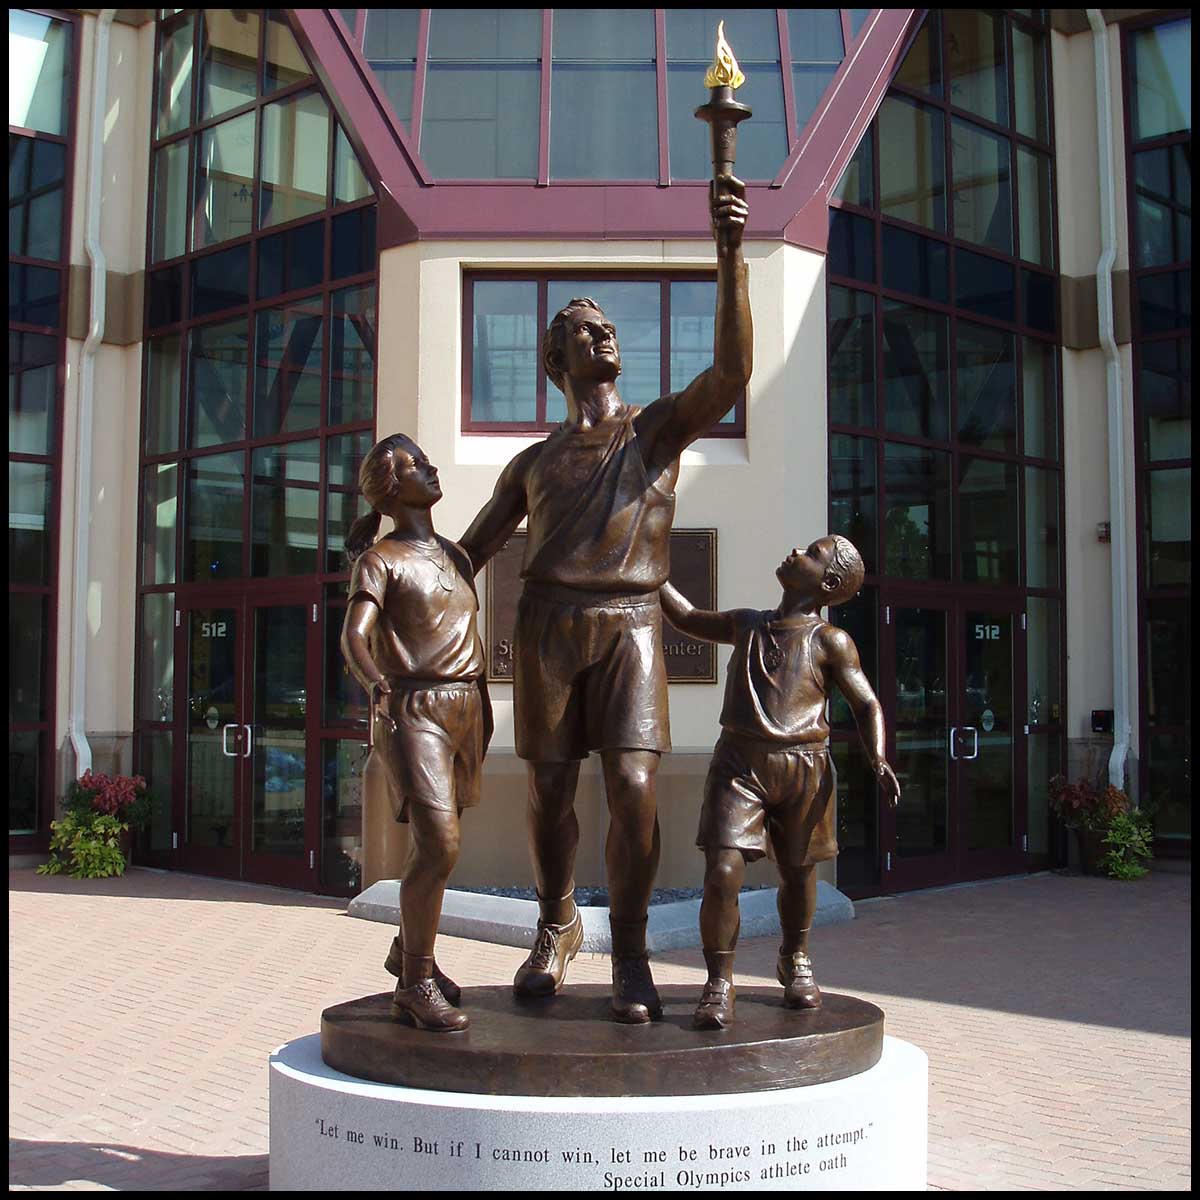 photo of bronze sculpture of man holding up Olympic torch with a boy and girl at his sides, placed on round stone base in plaza in front of building